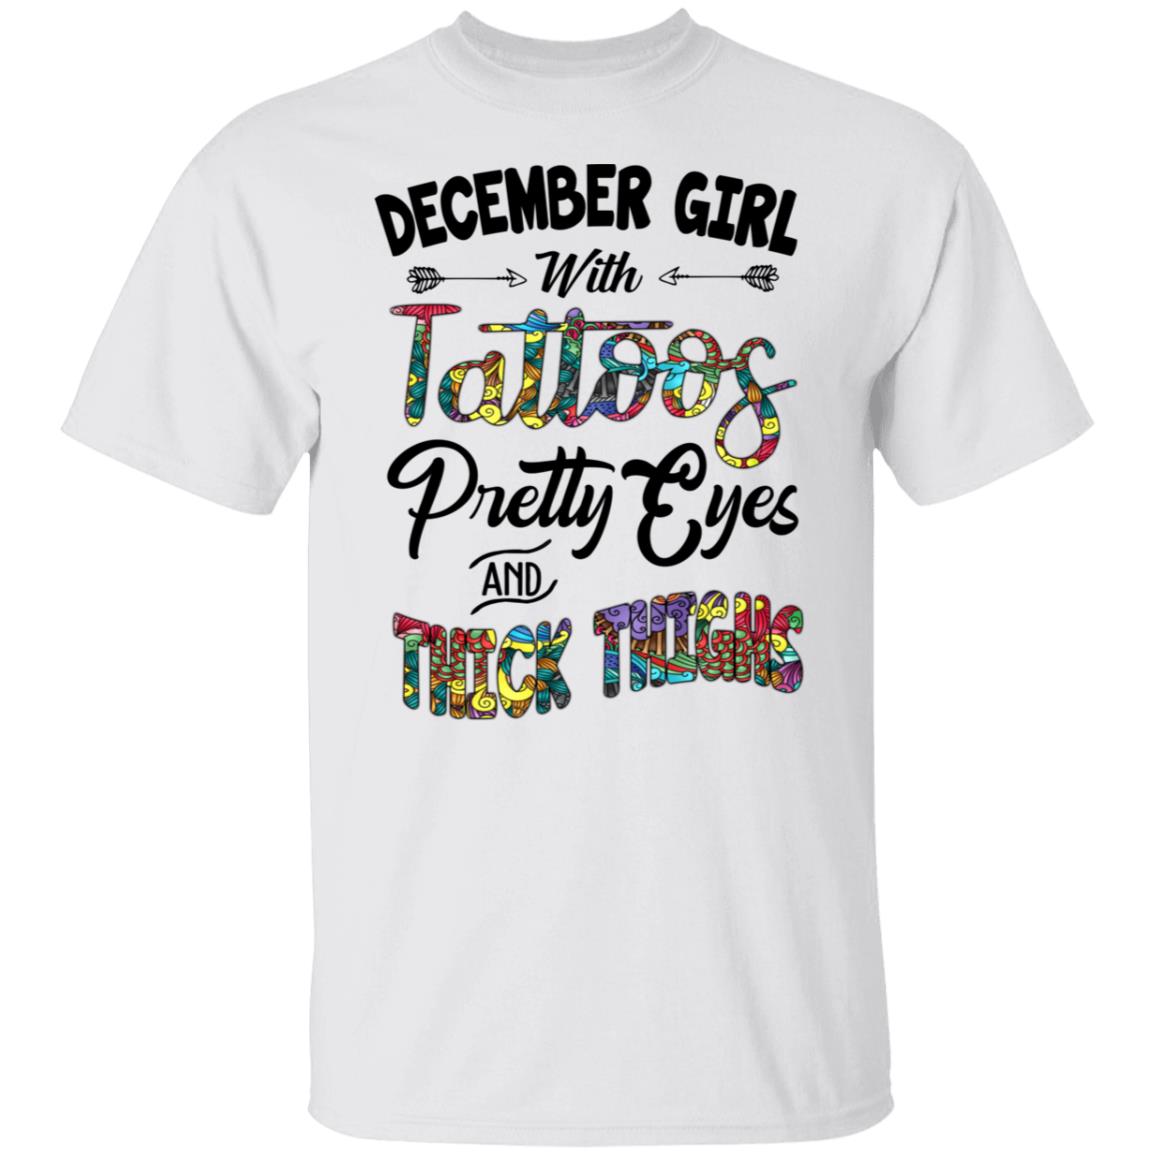 December Girl With Tattoos Pretty Eyes And Thick Thighs Shirt